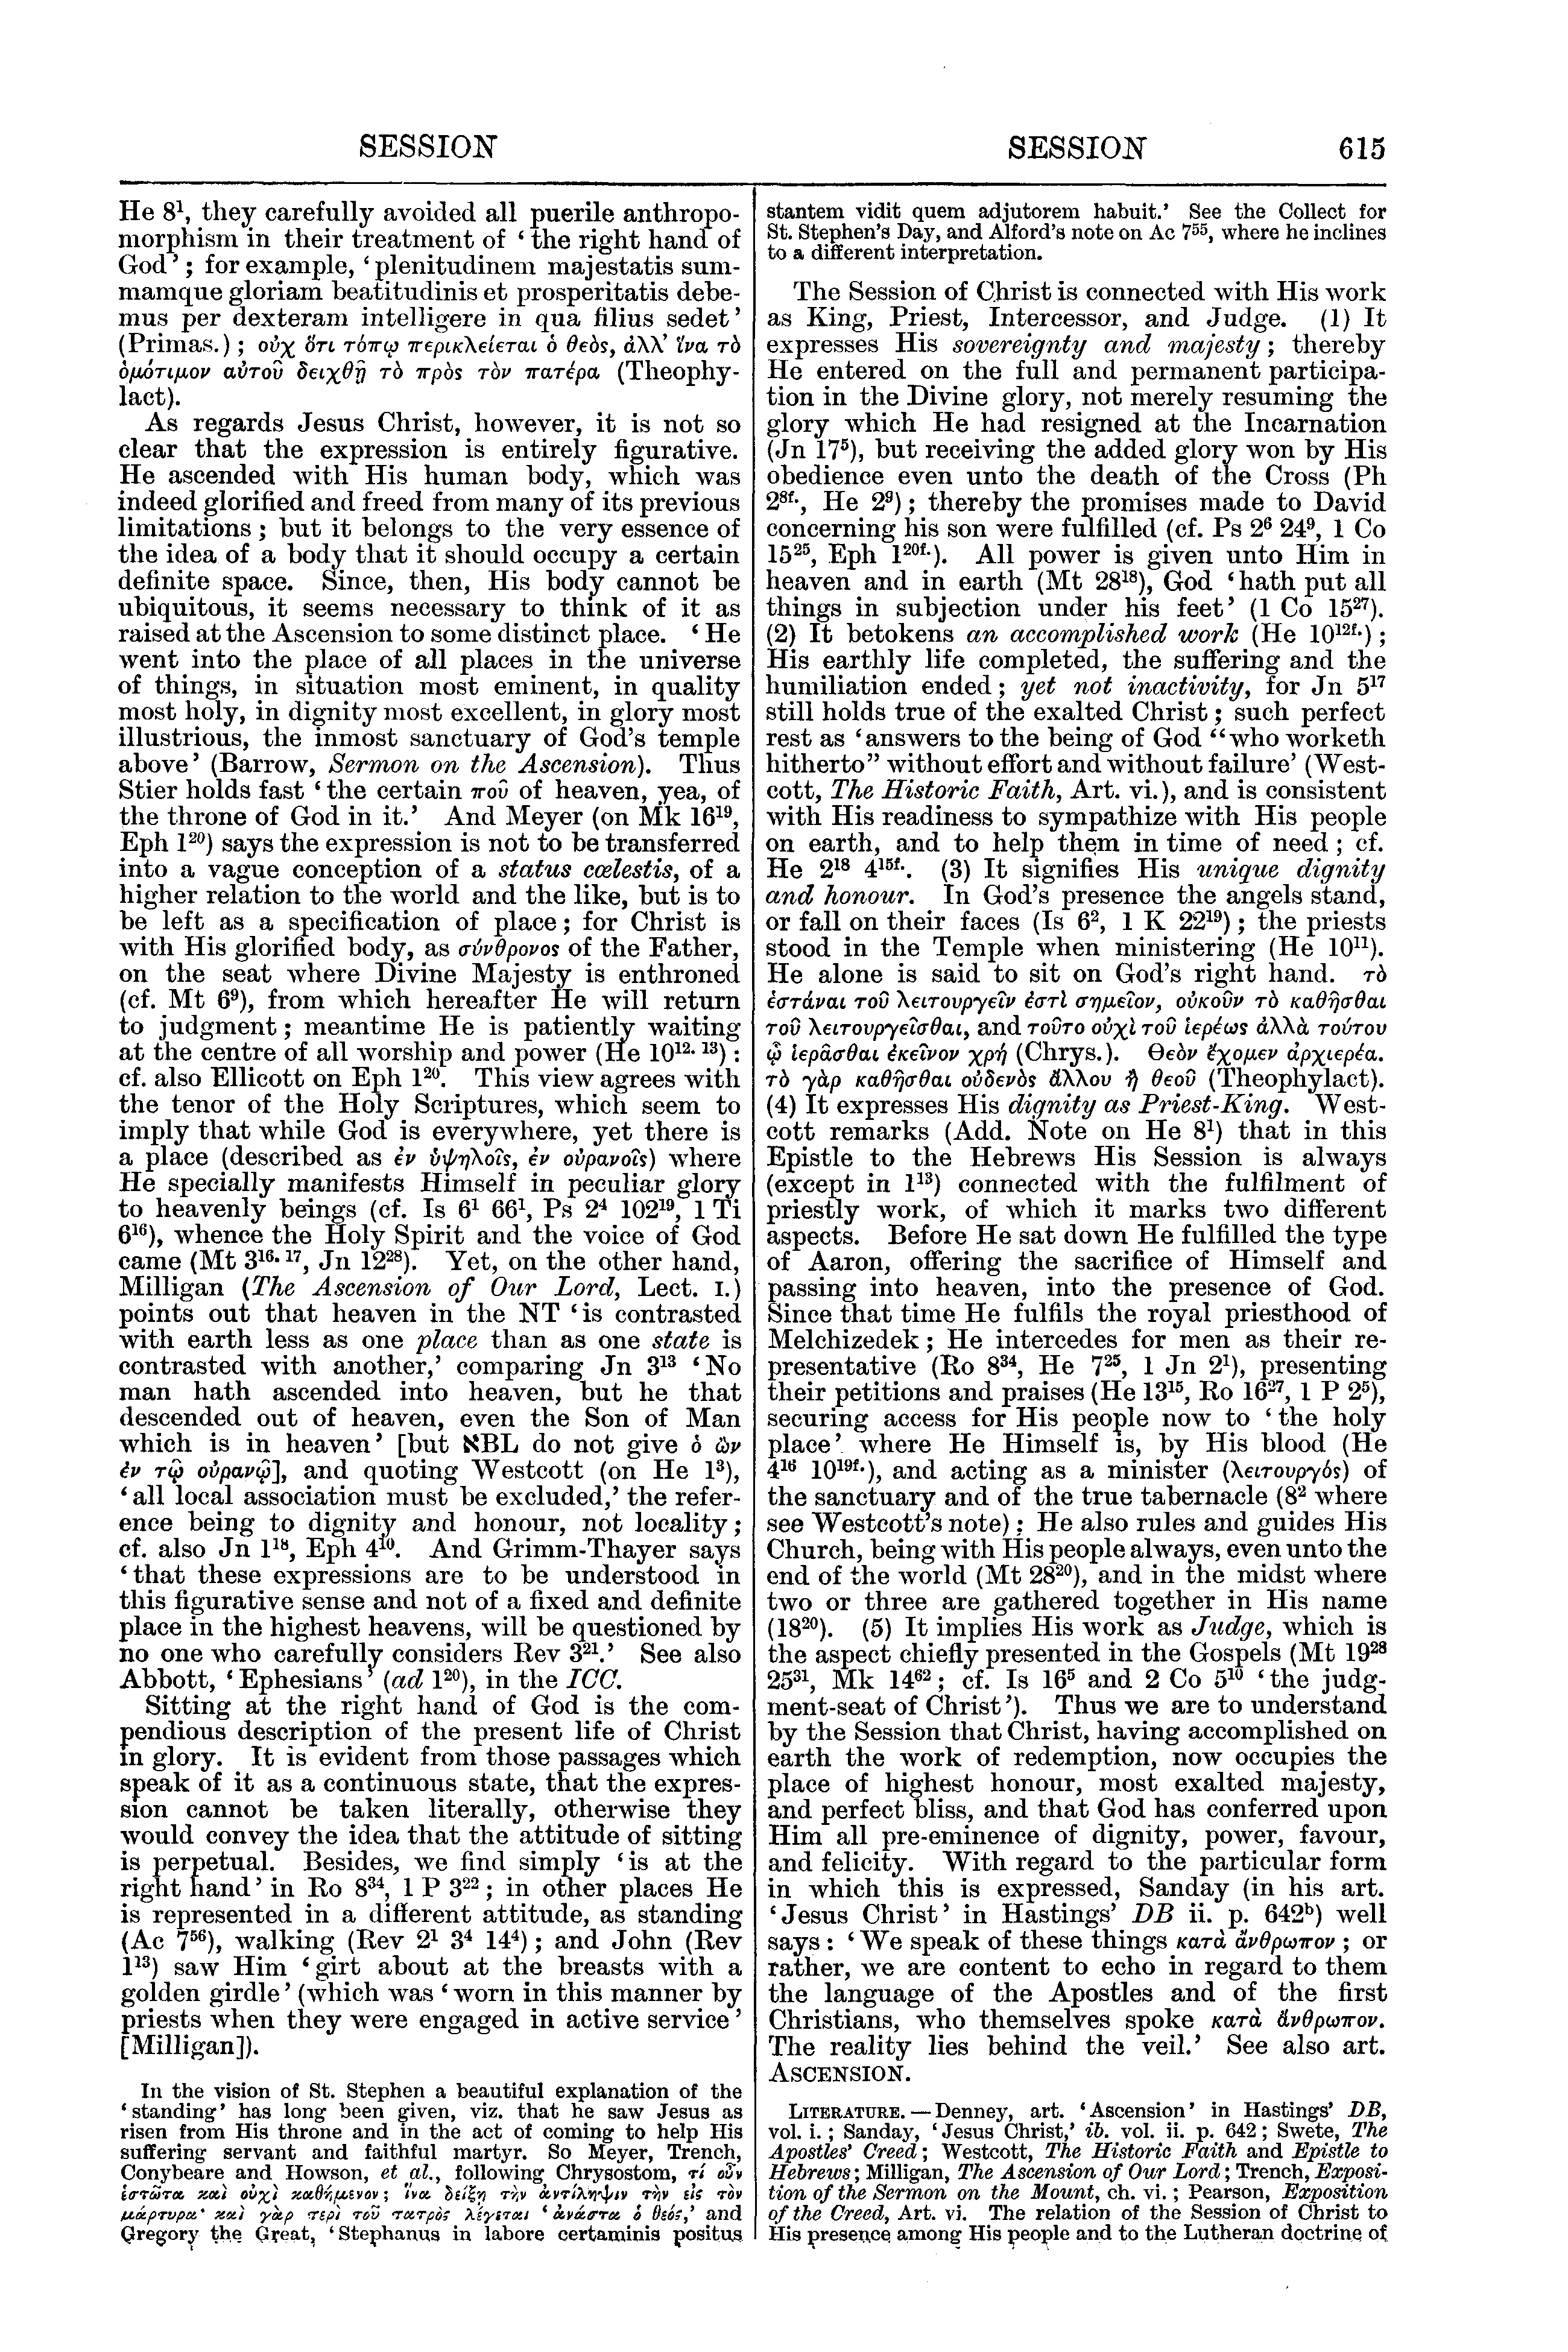 Image of page 615